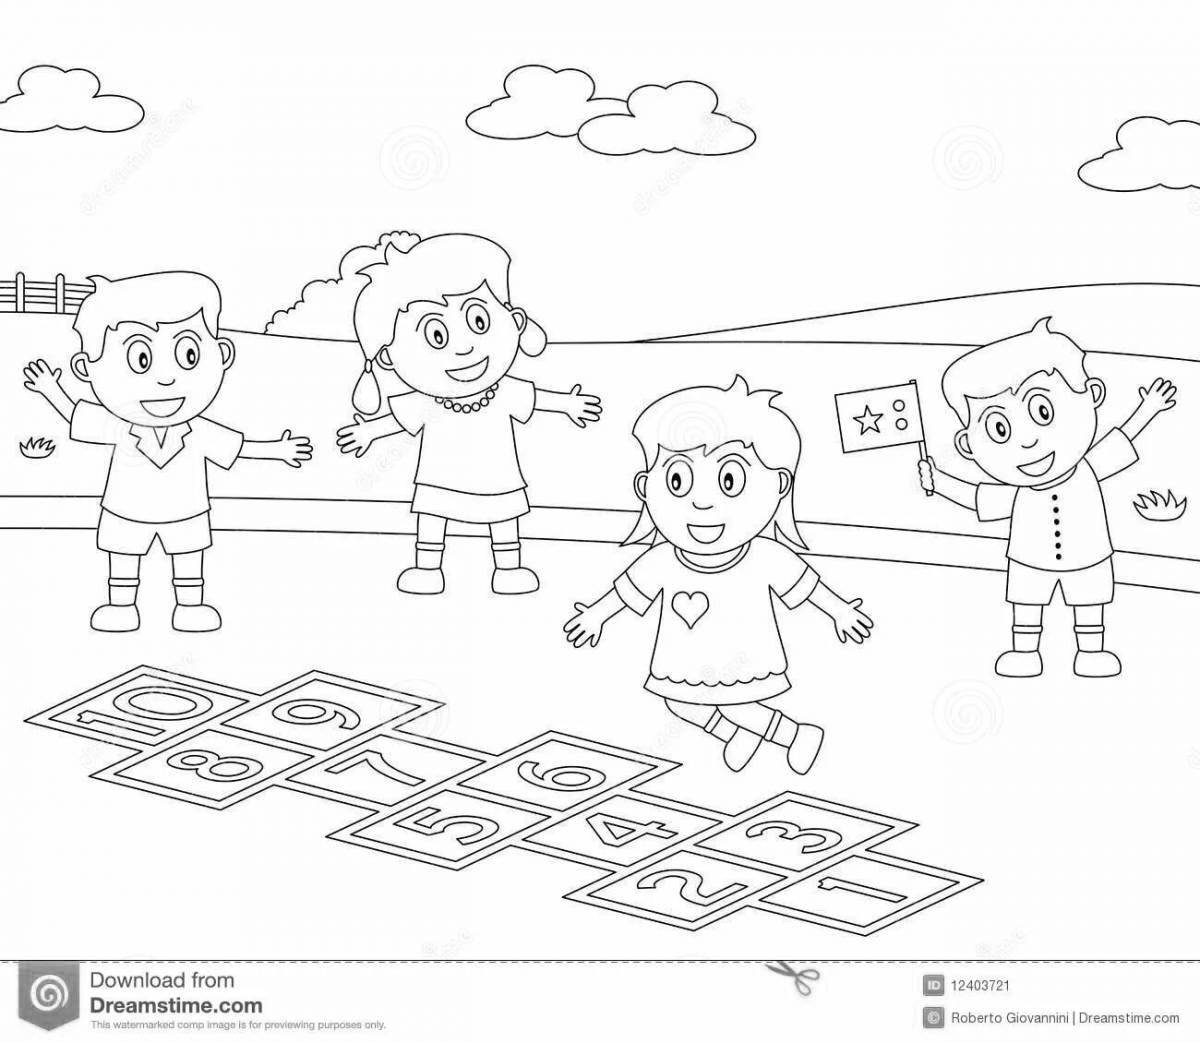 Fun classic coloring pages